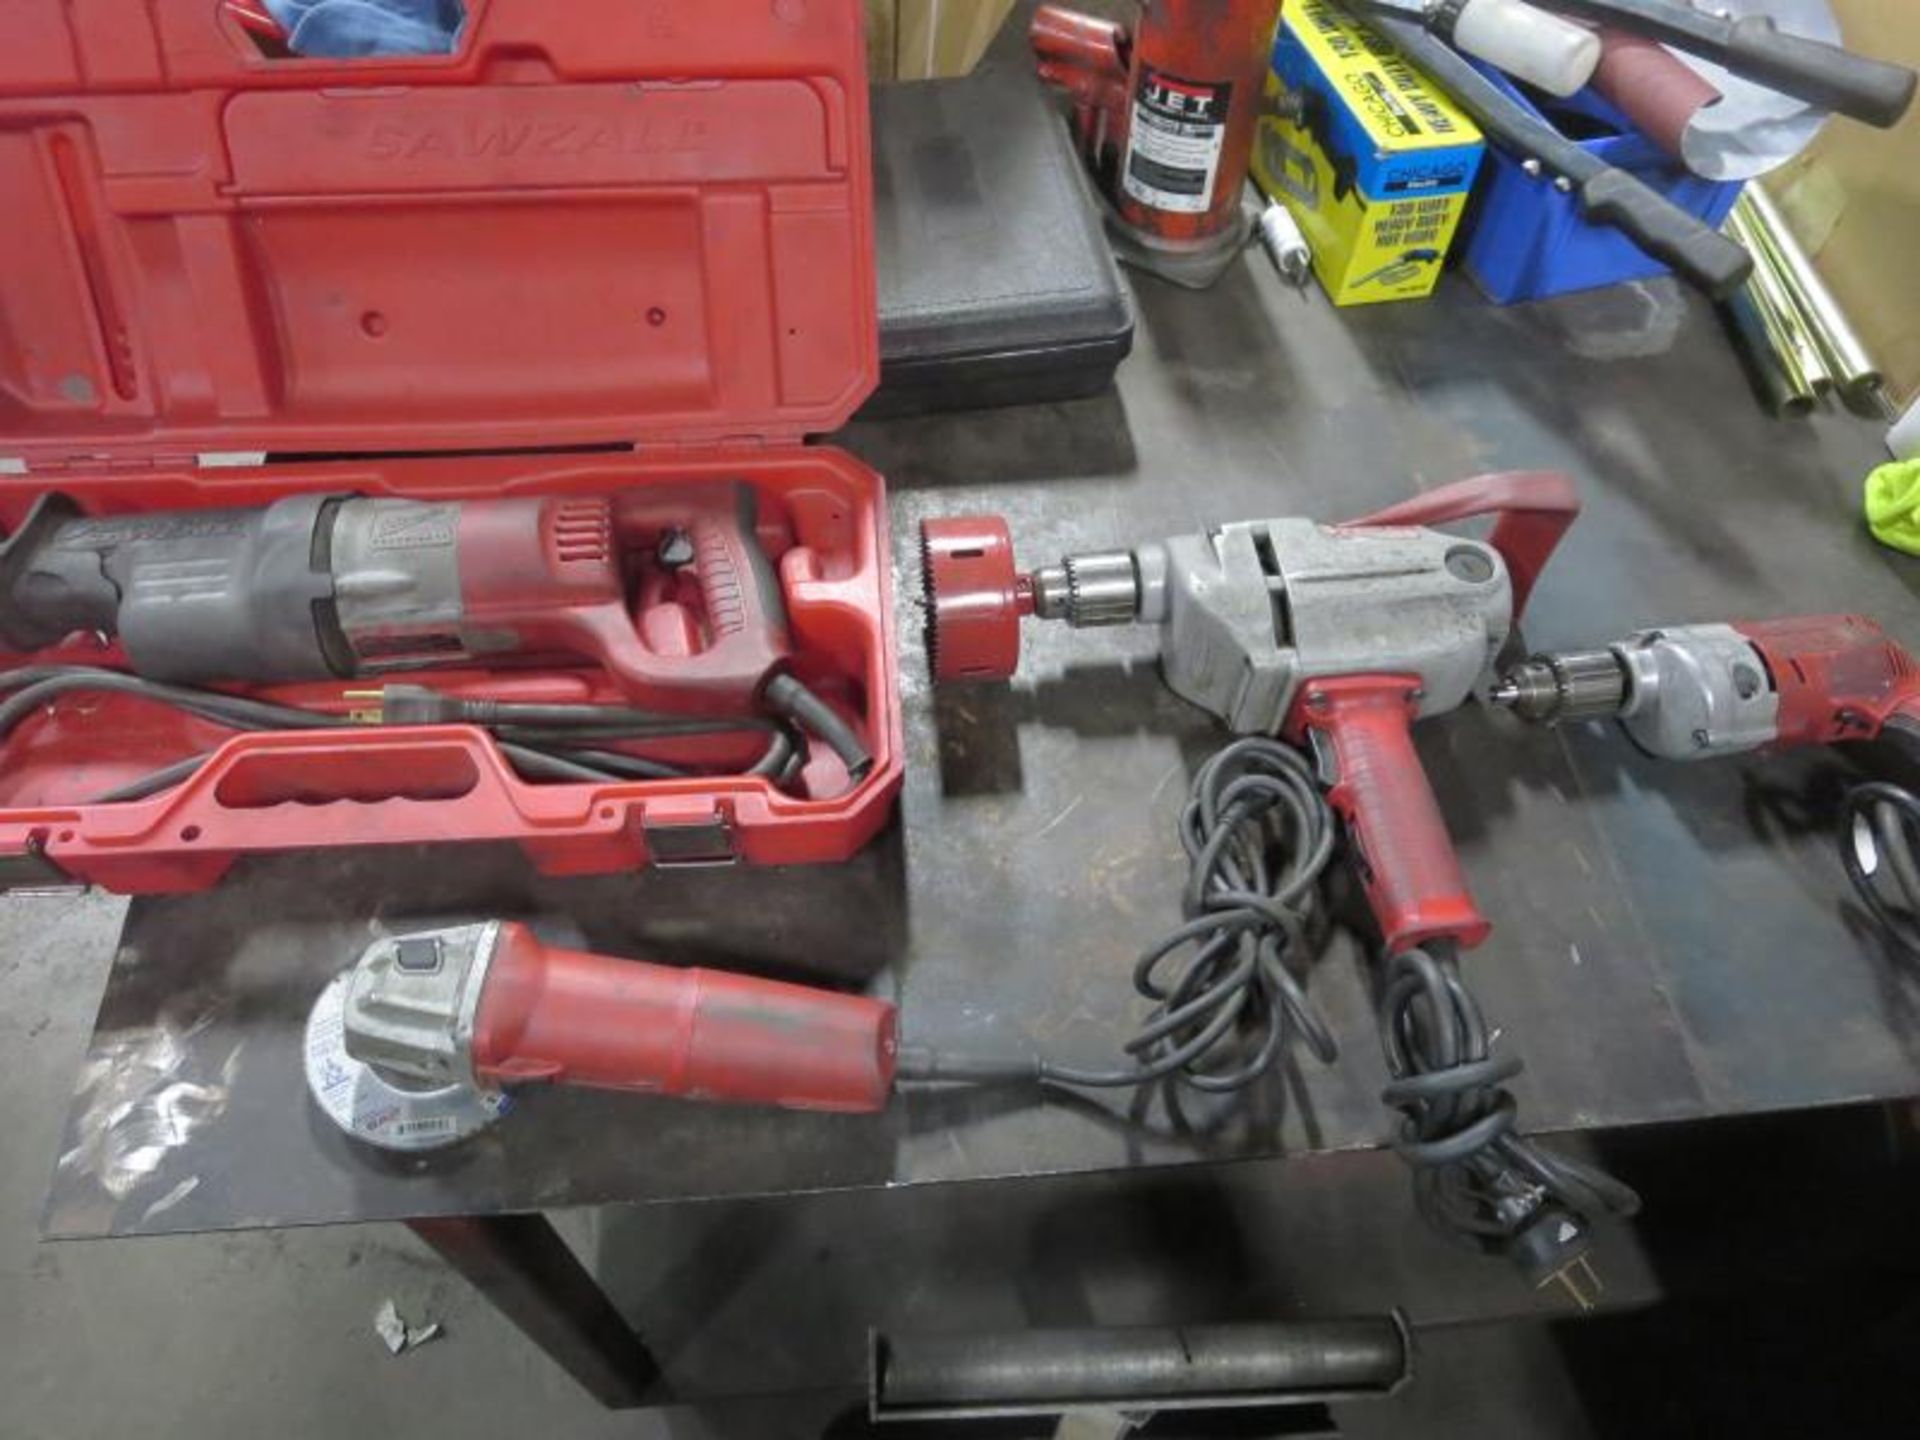 Milwaukee Lot (Qty 4) Drill, Saw & Grinder. Consisting of (1) Reciprocating saw, (1) 4" Grinder, (2)